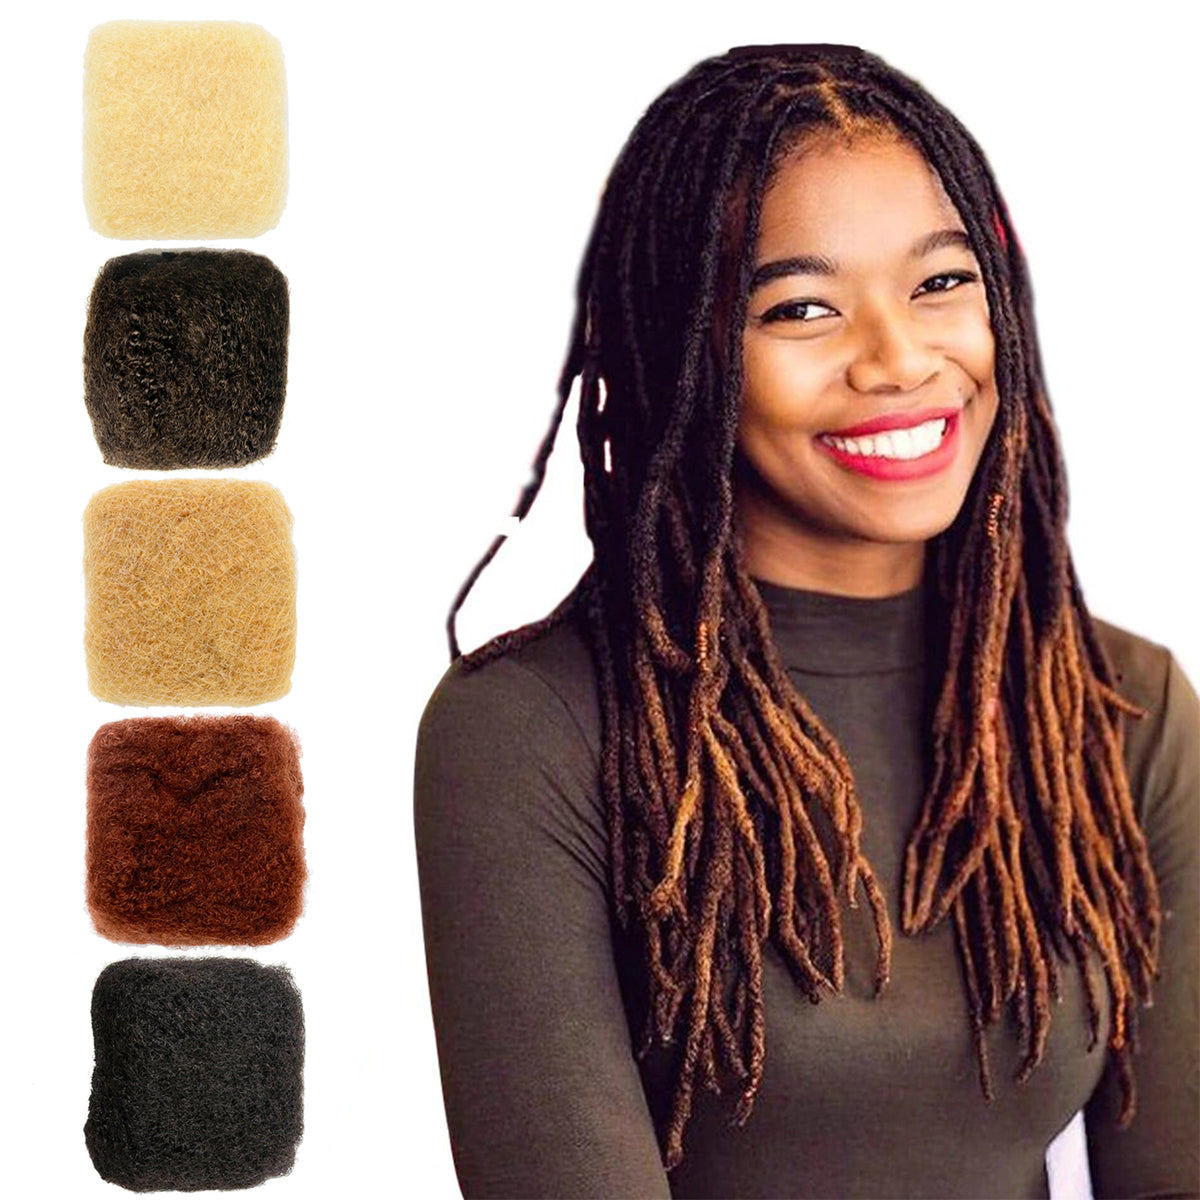 Perfect Tranzitions Afro Kinky Human Hairs For Making,Repairing & Bulking Locs 8 Inch Long Afro Kinky Bulk Human Hair For Dreadlock Extensions 100% Natural Afro Hairs For Twisting & Braiding 29g/1Oz (#2 / Dark Brown, 8 Inch)